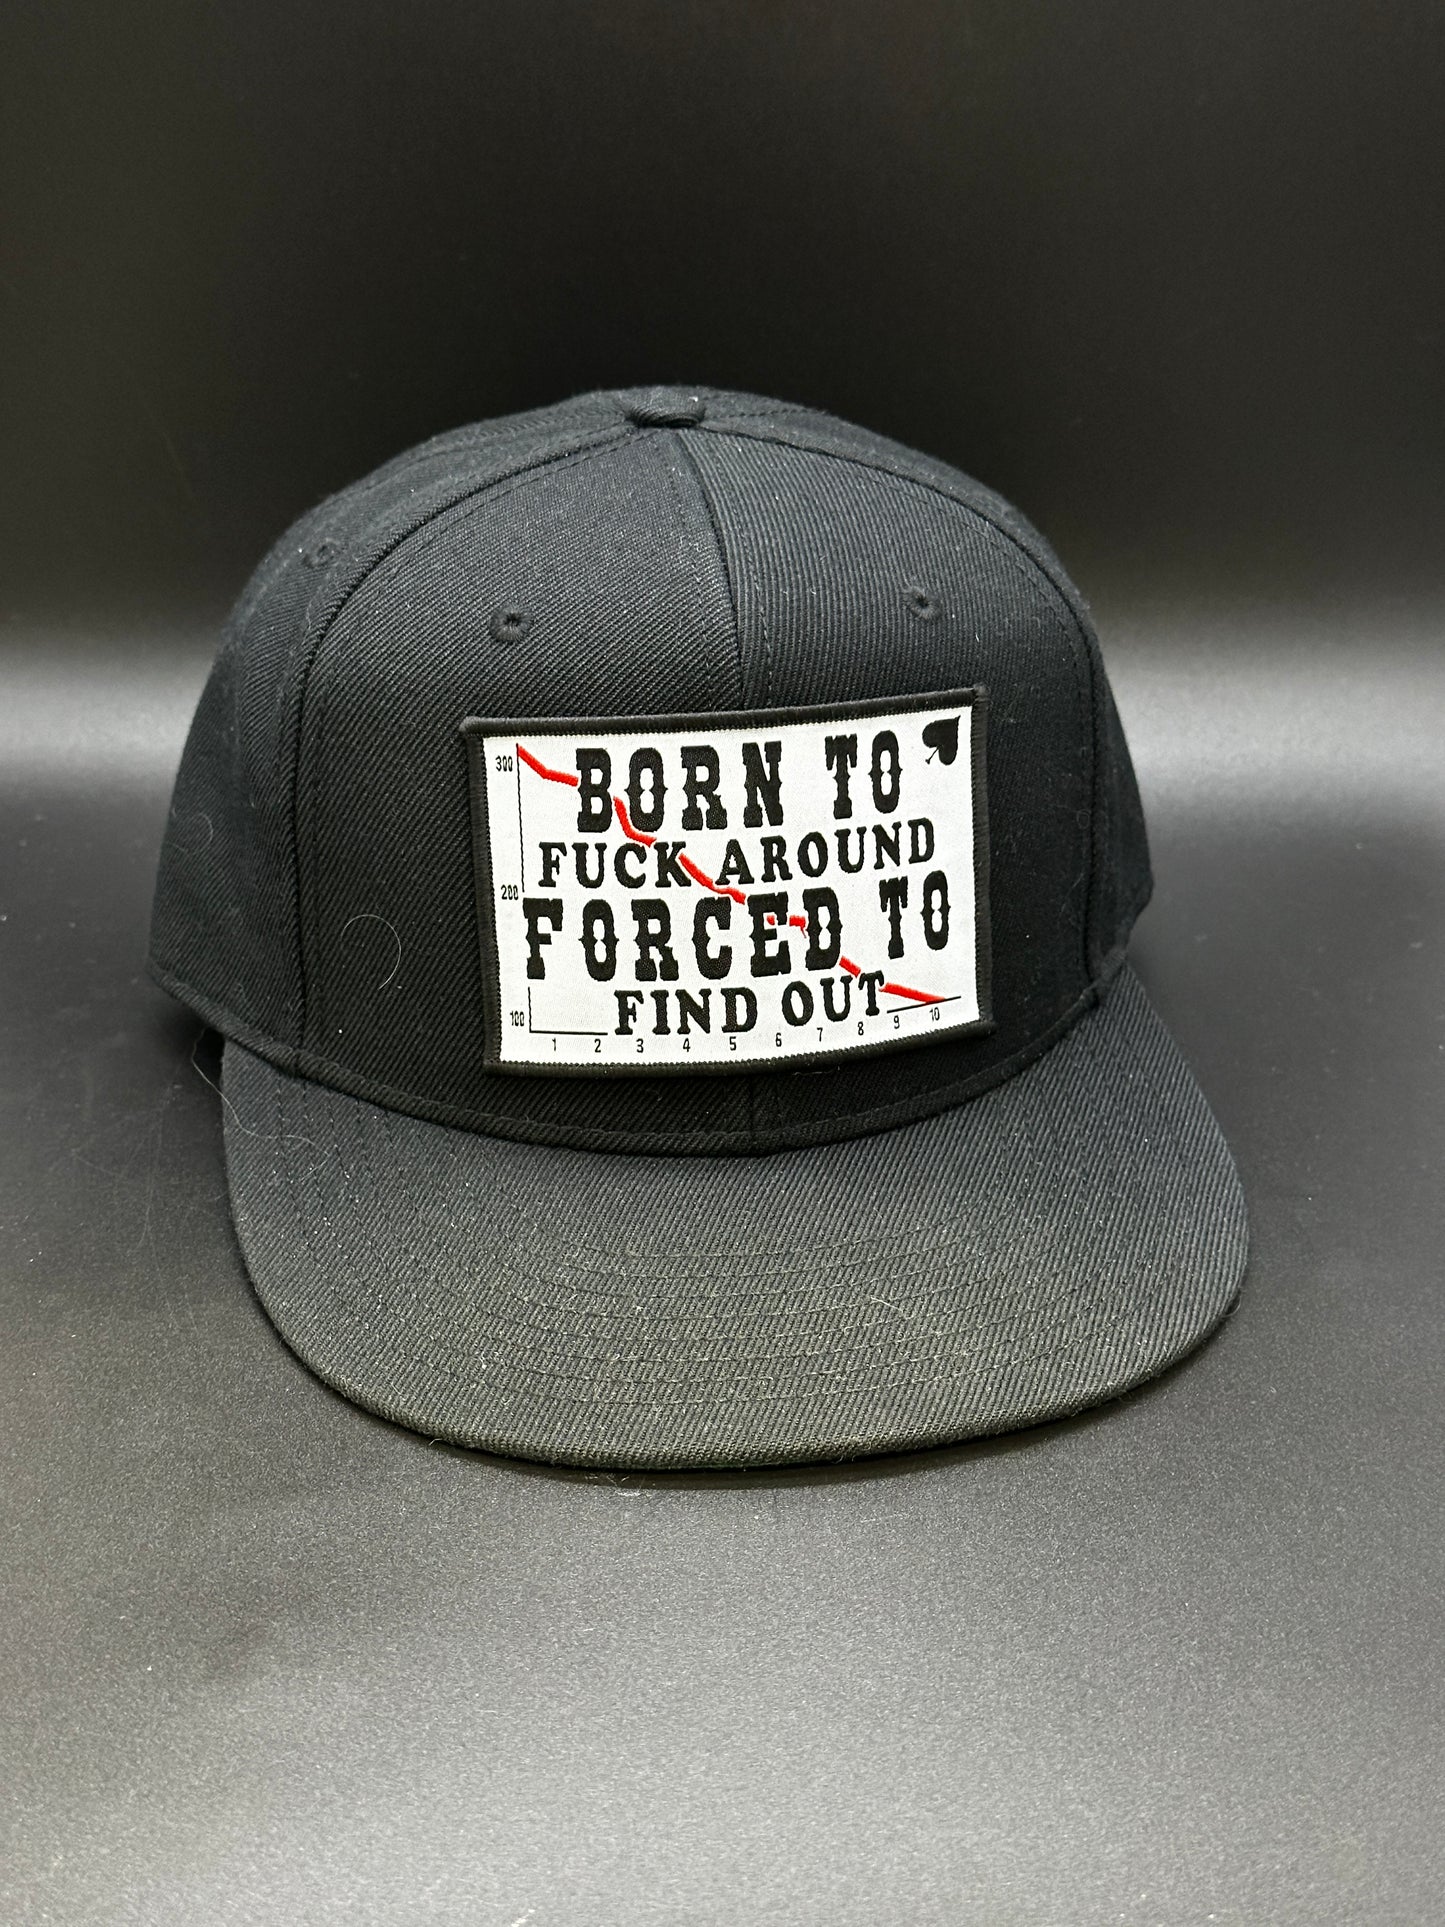 Born to FA Forced to FO